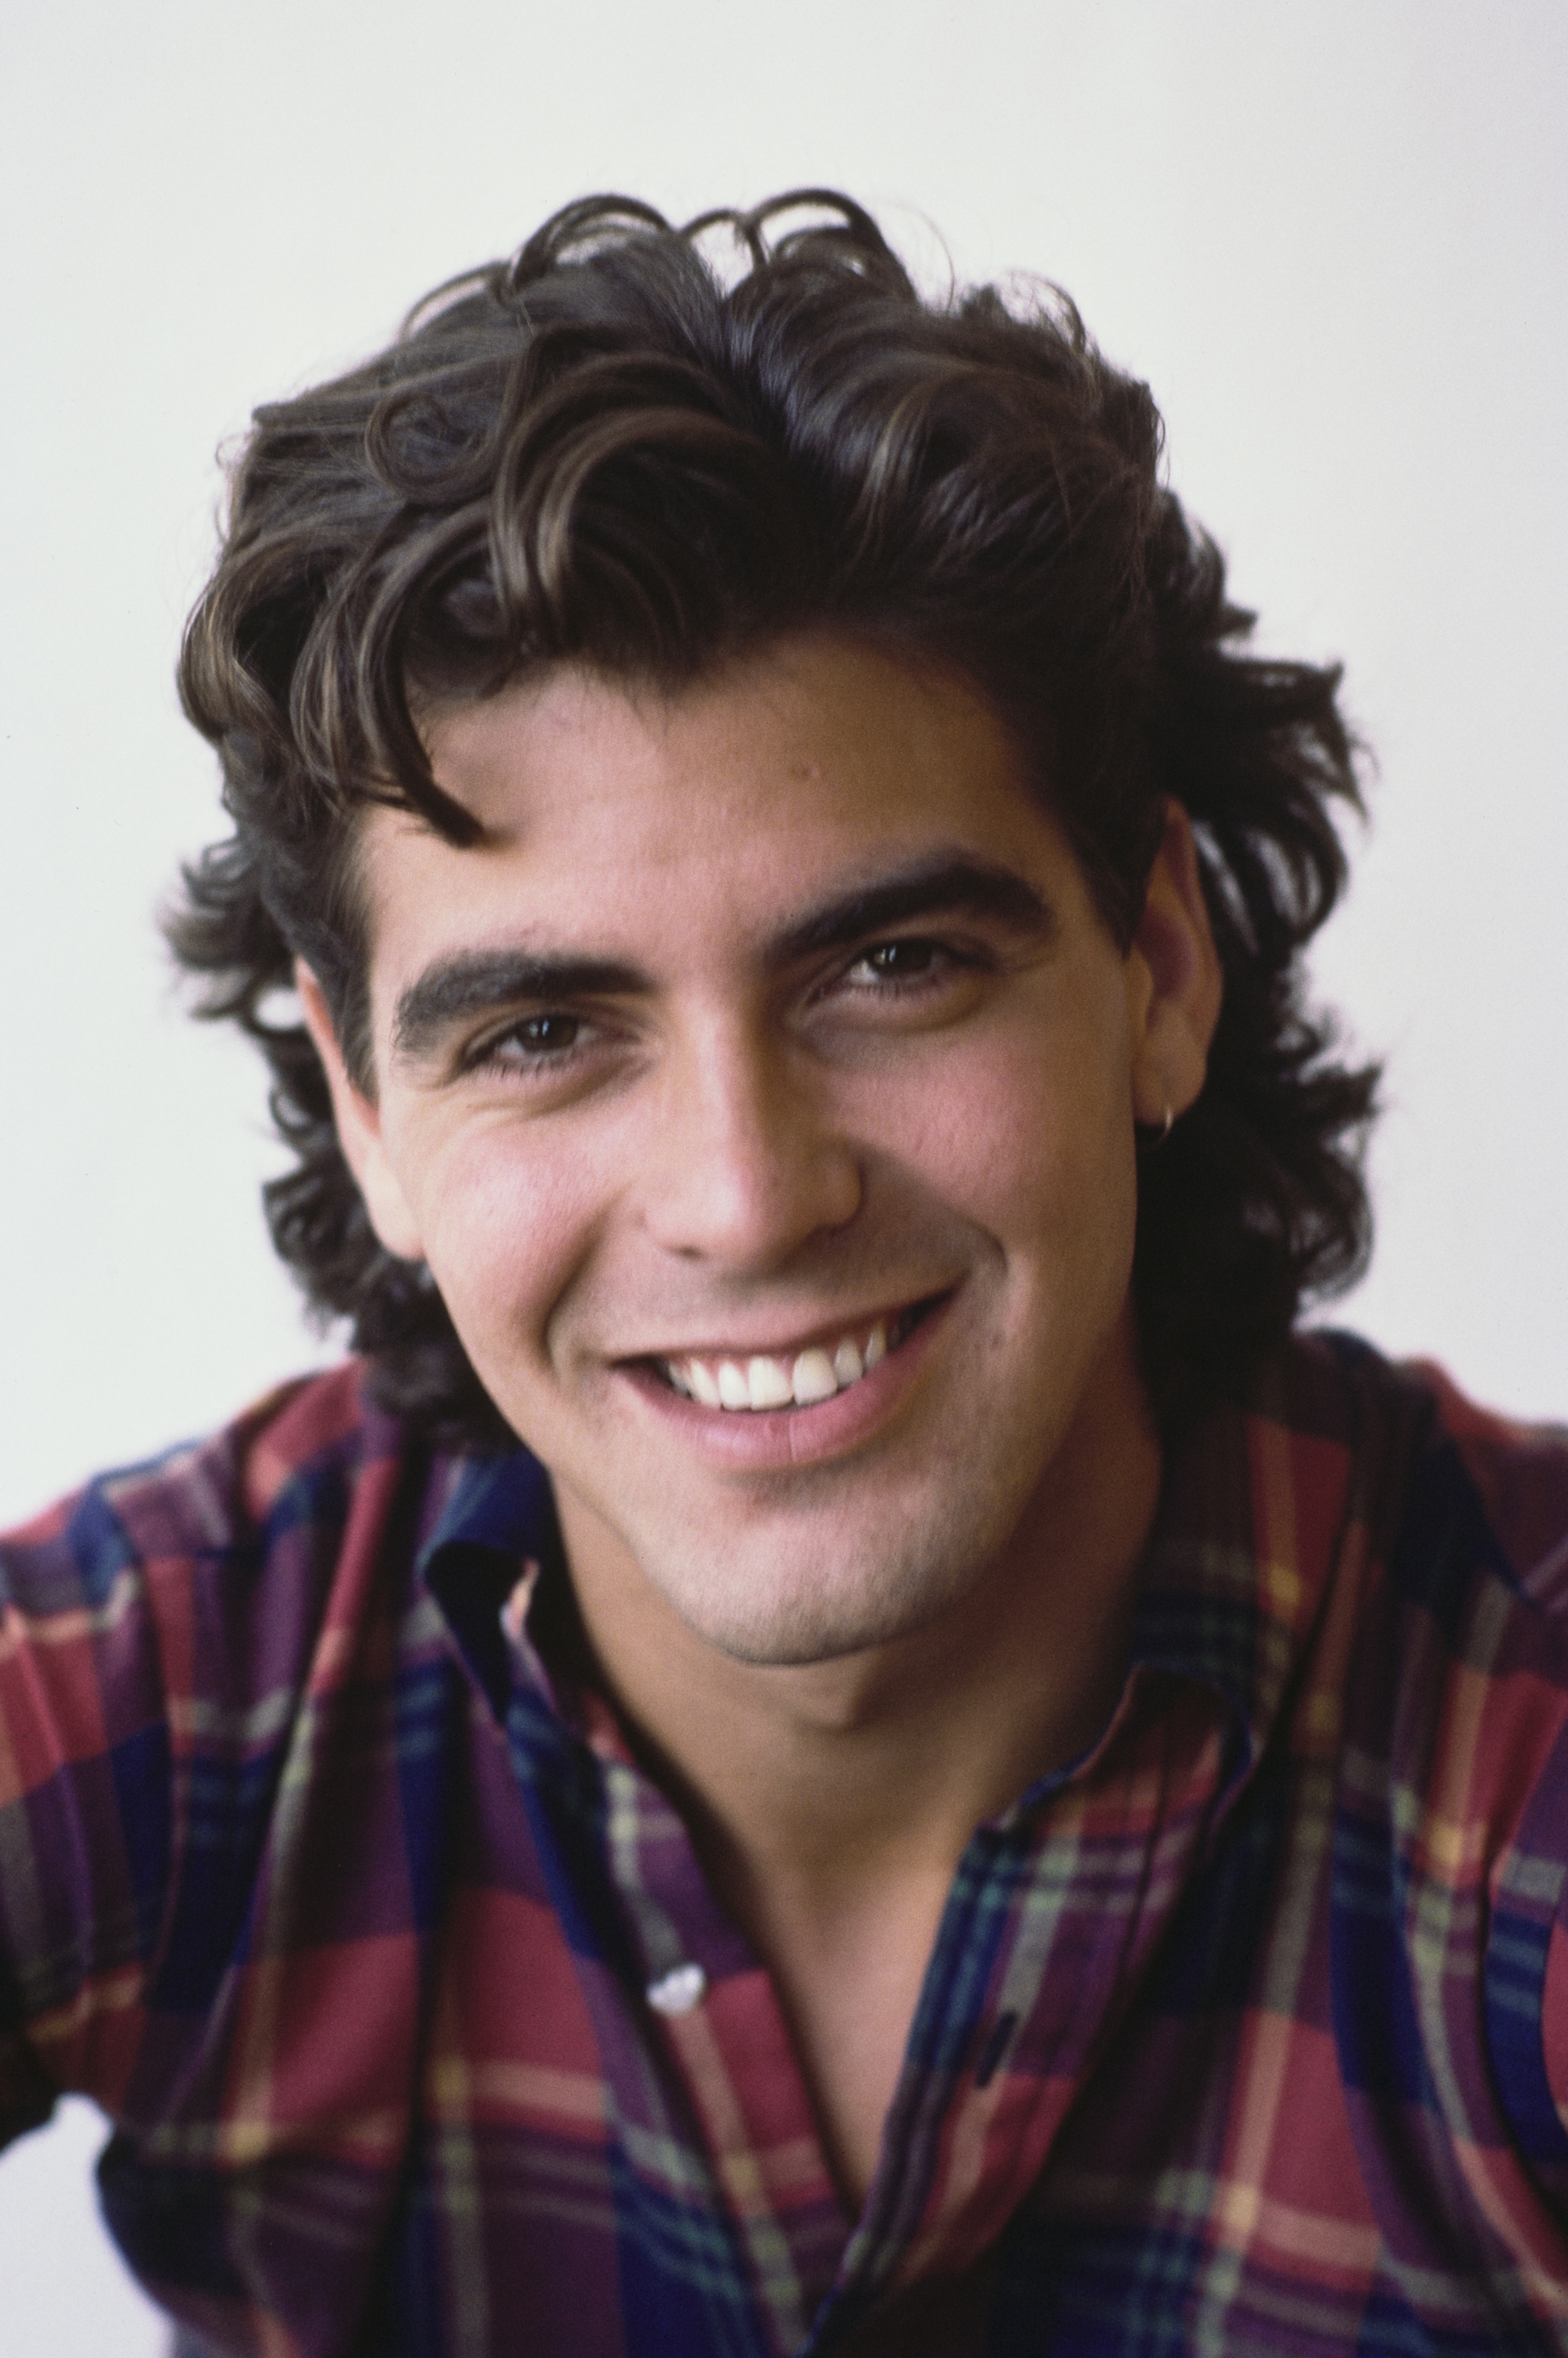 George Clooney participating in a portrait session in sunny Los Angeles, California in May 1985 | Source: Getty Images